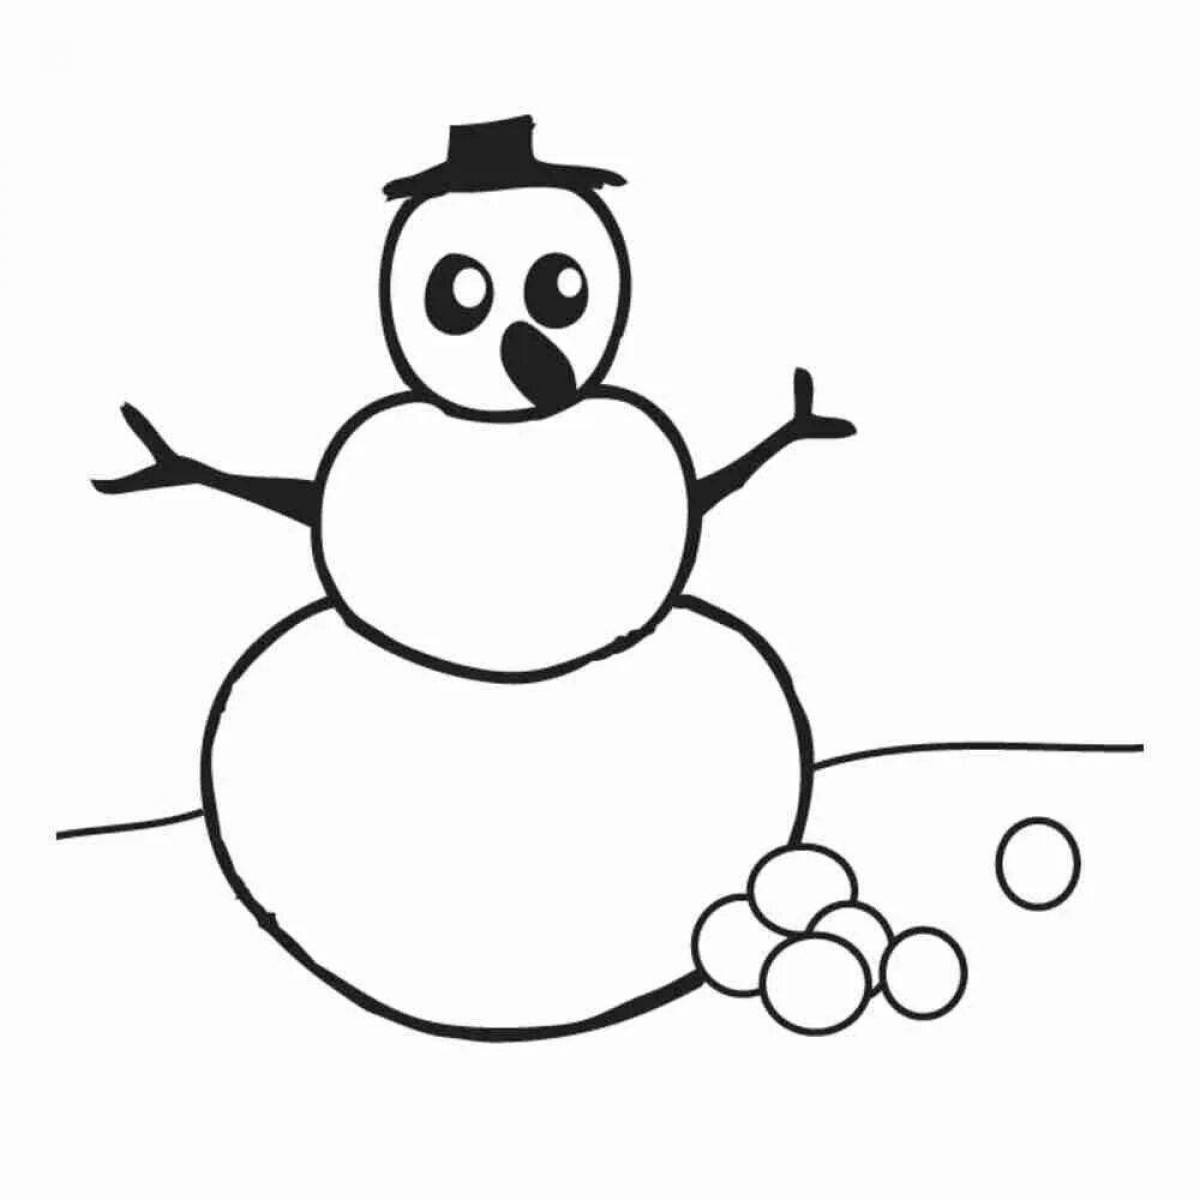 Funny snowball coloring book